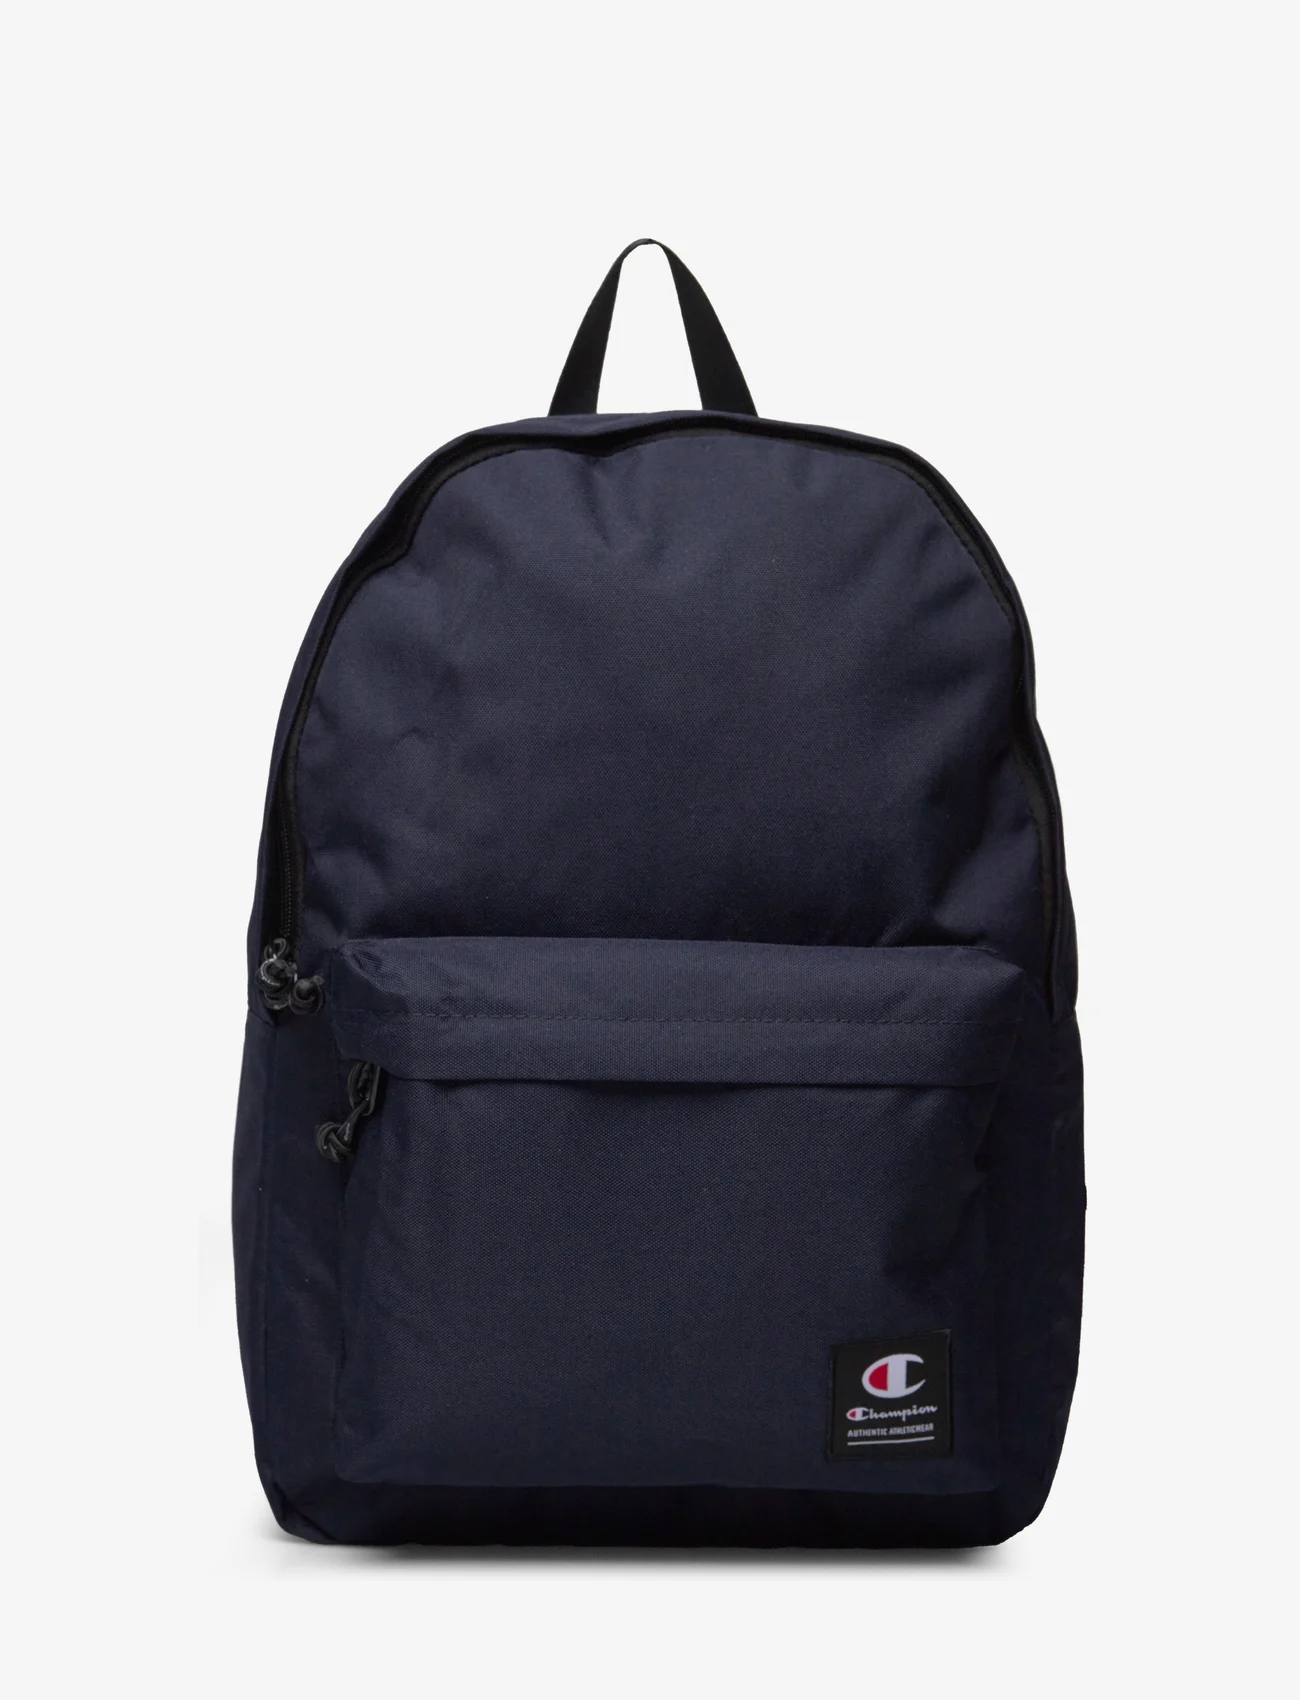 Champion - Backpack - lowest prices - sky captain - 0